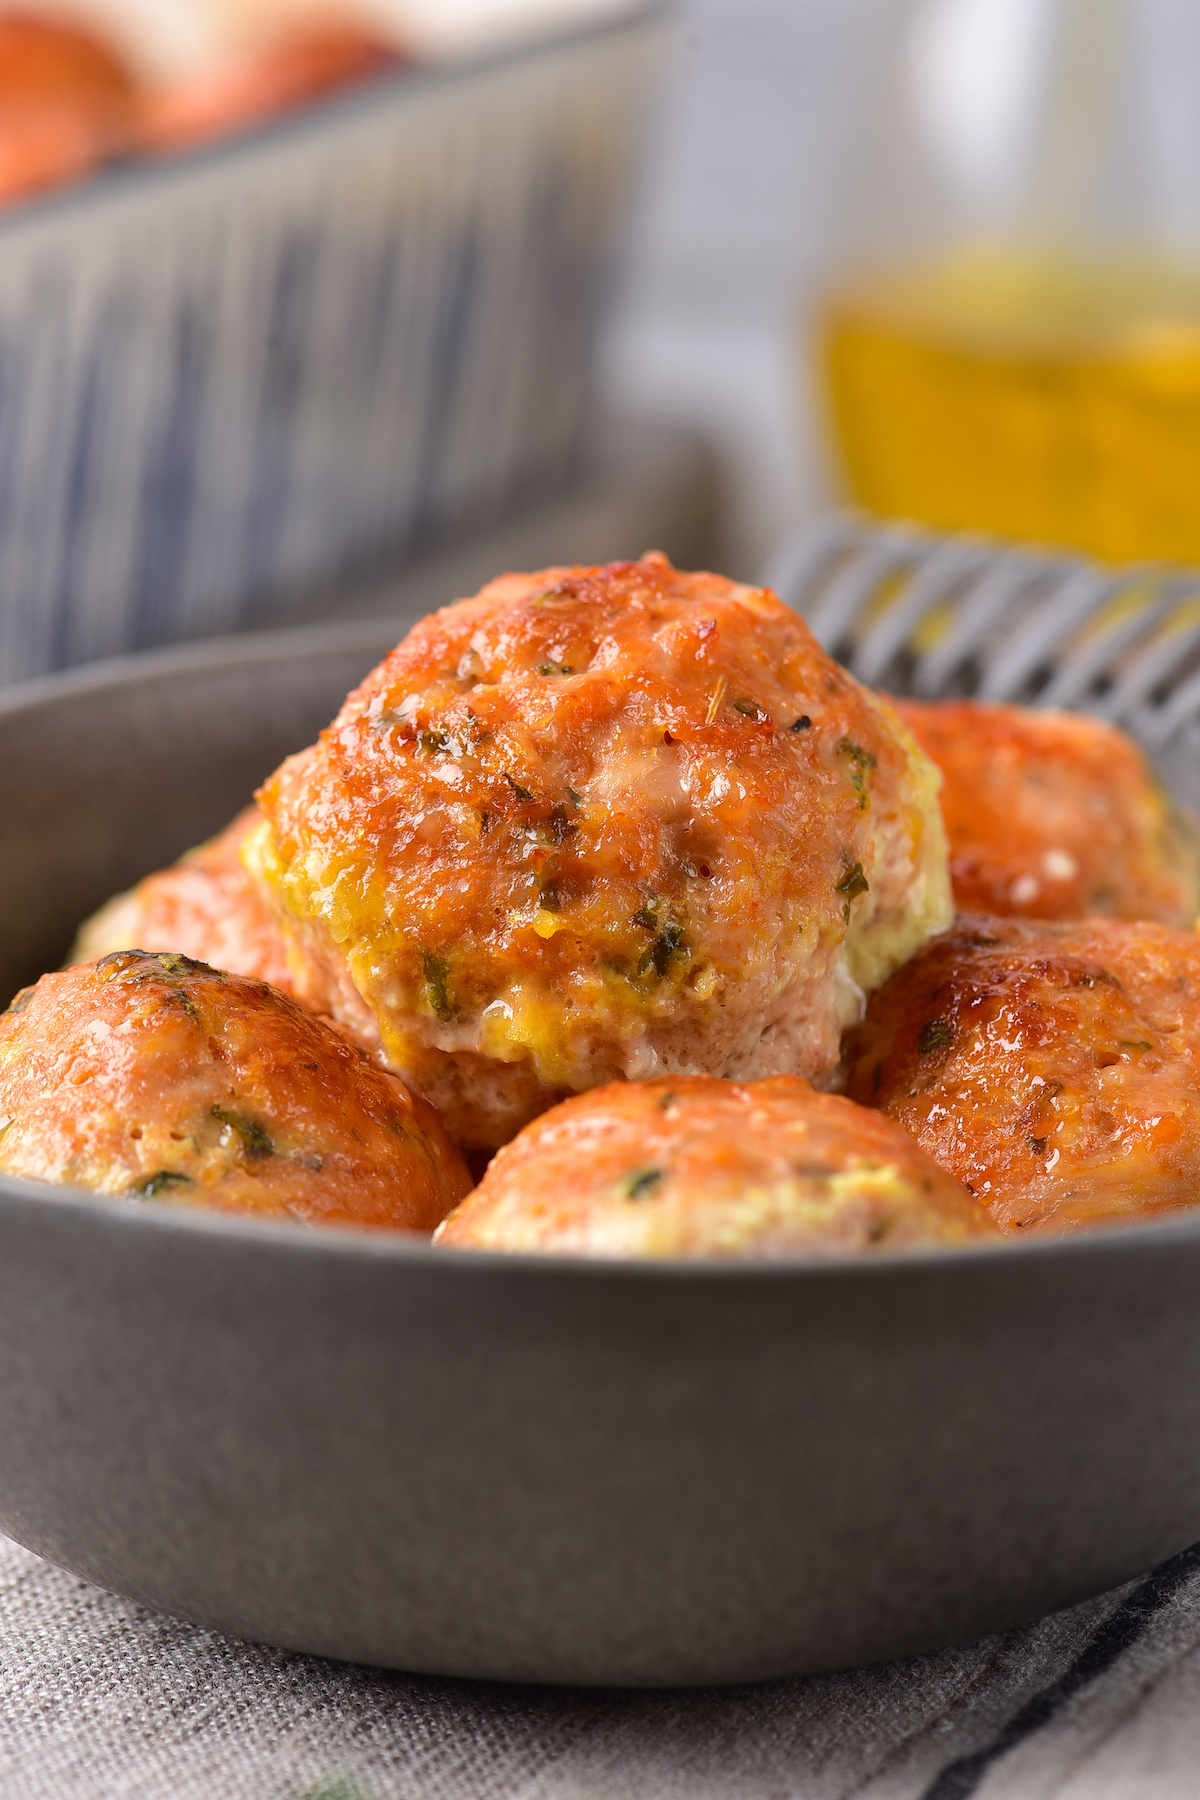 the chicken meatballs in a serving dish